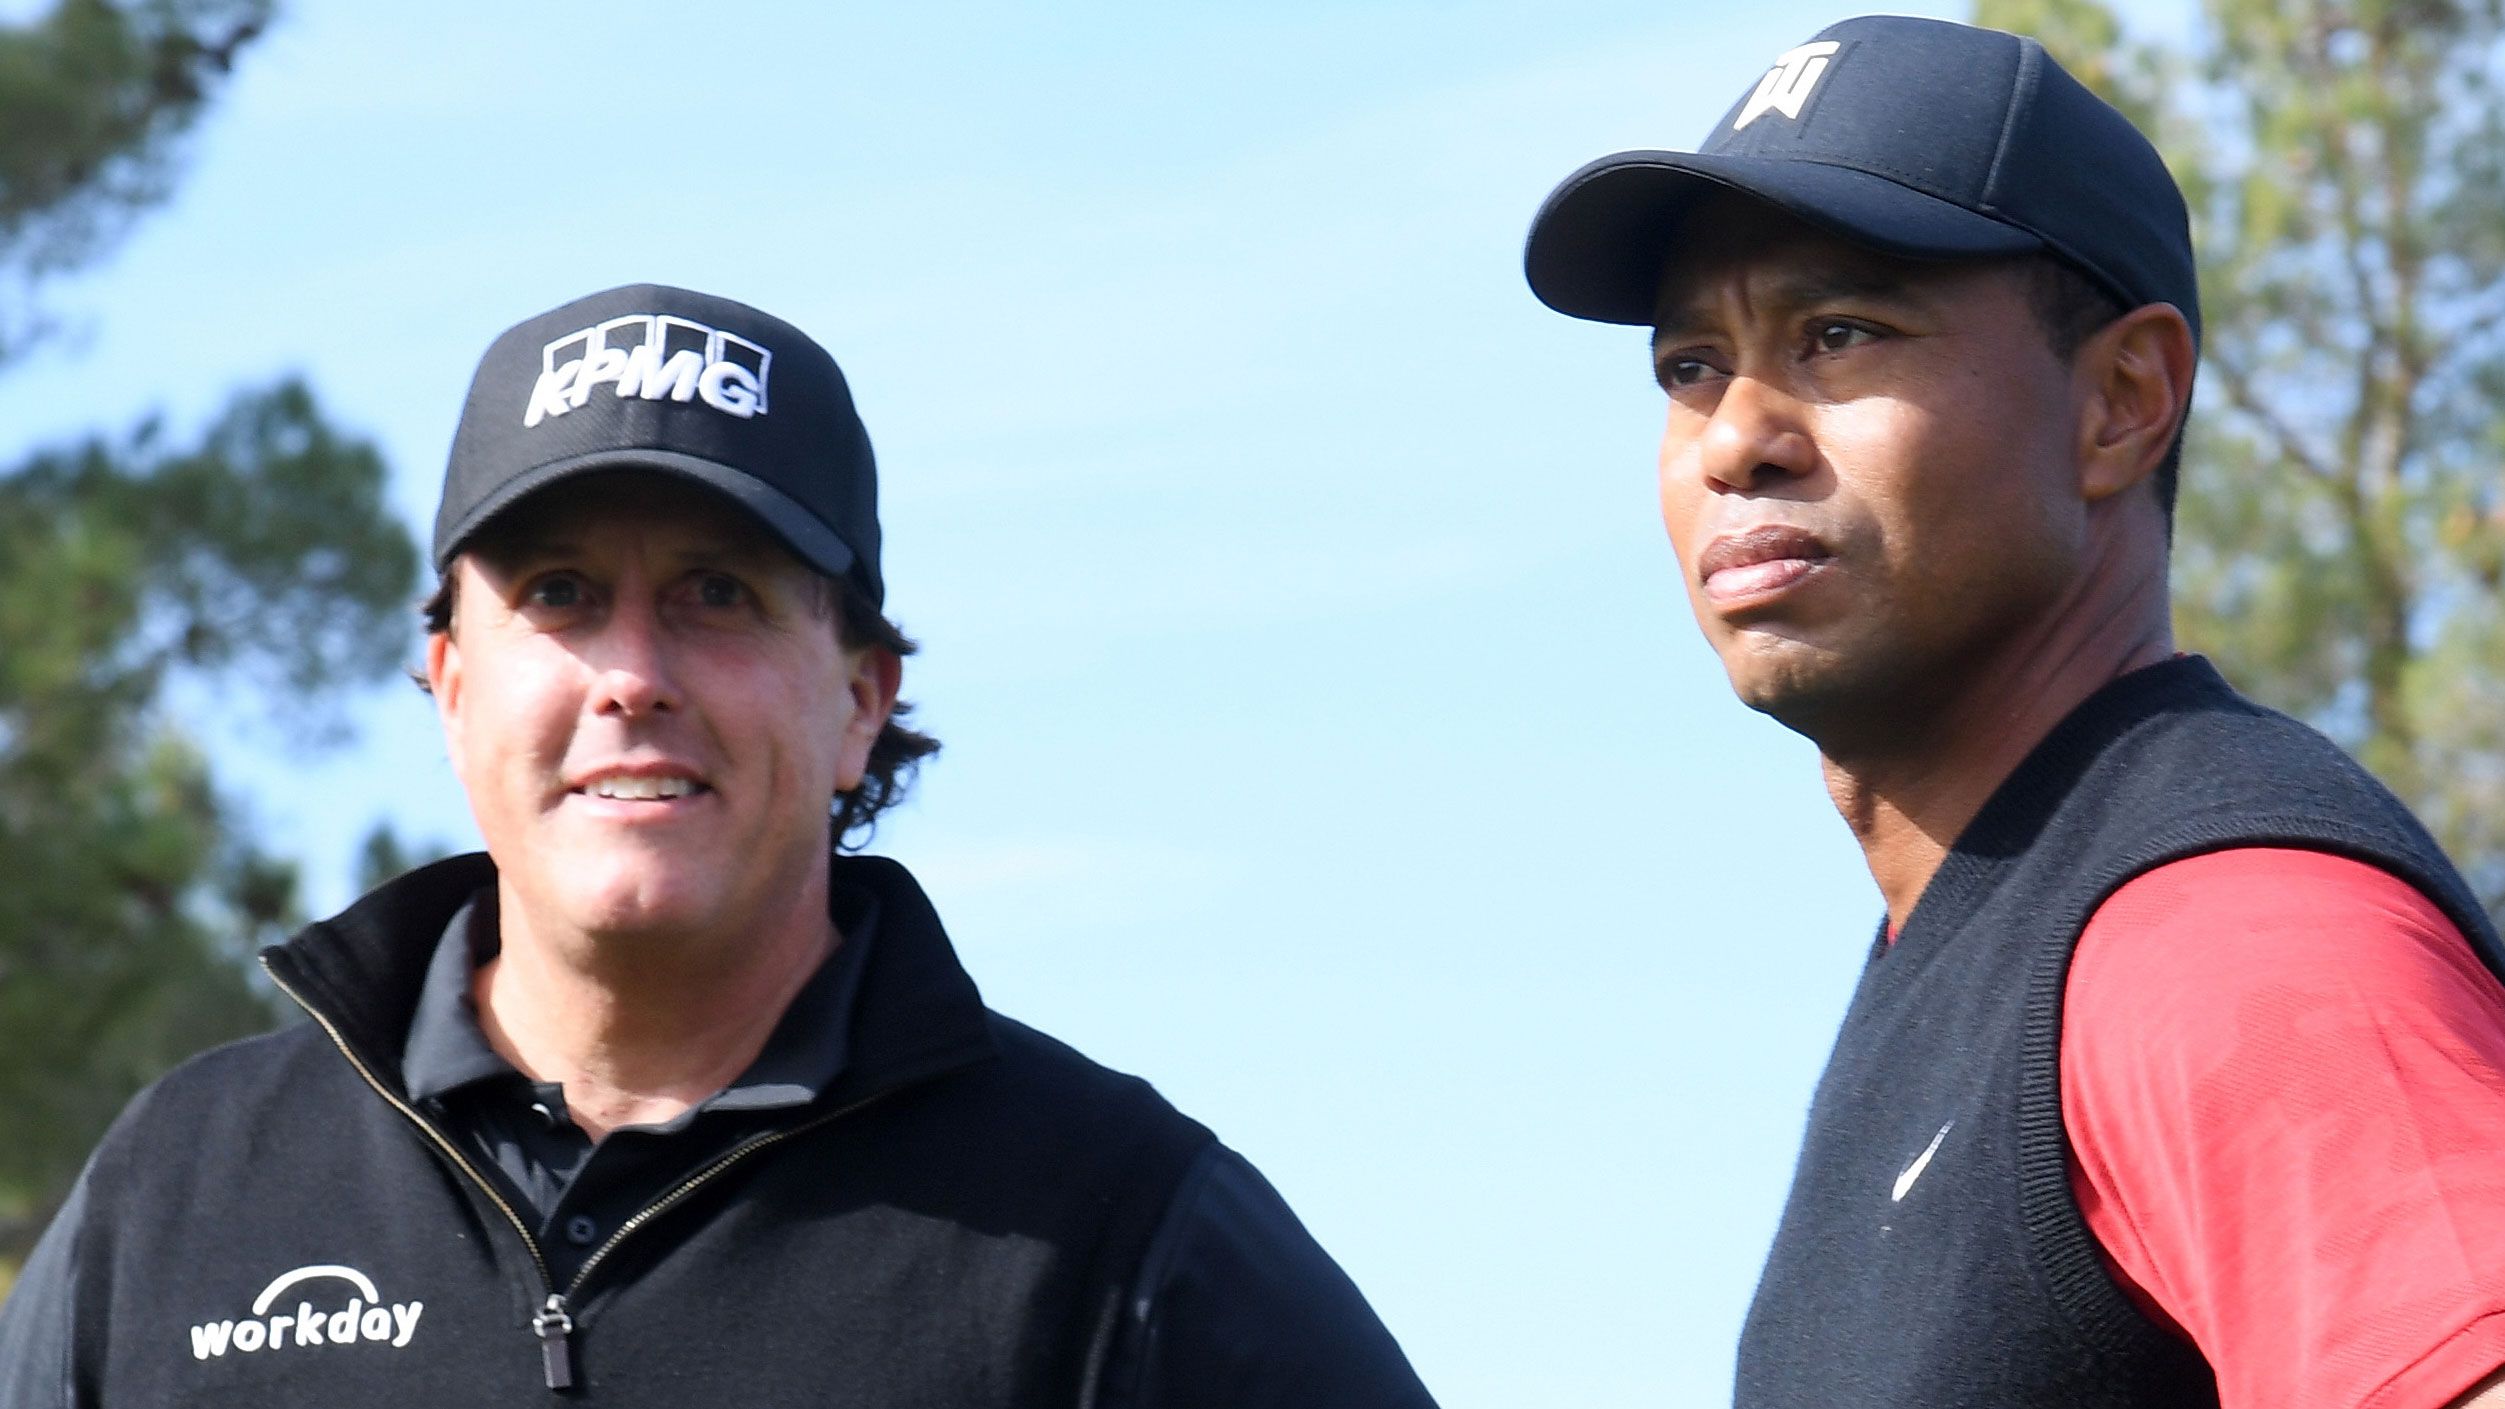 Tiger Woods burns Phil Mickelson with one word tweet over $11 bonus payment